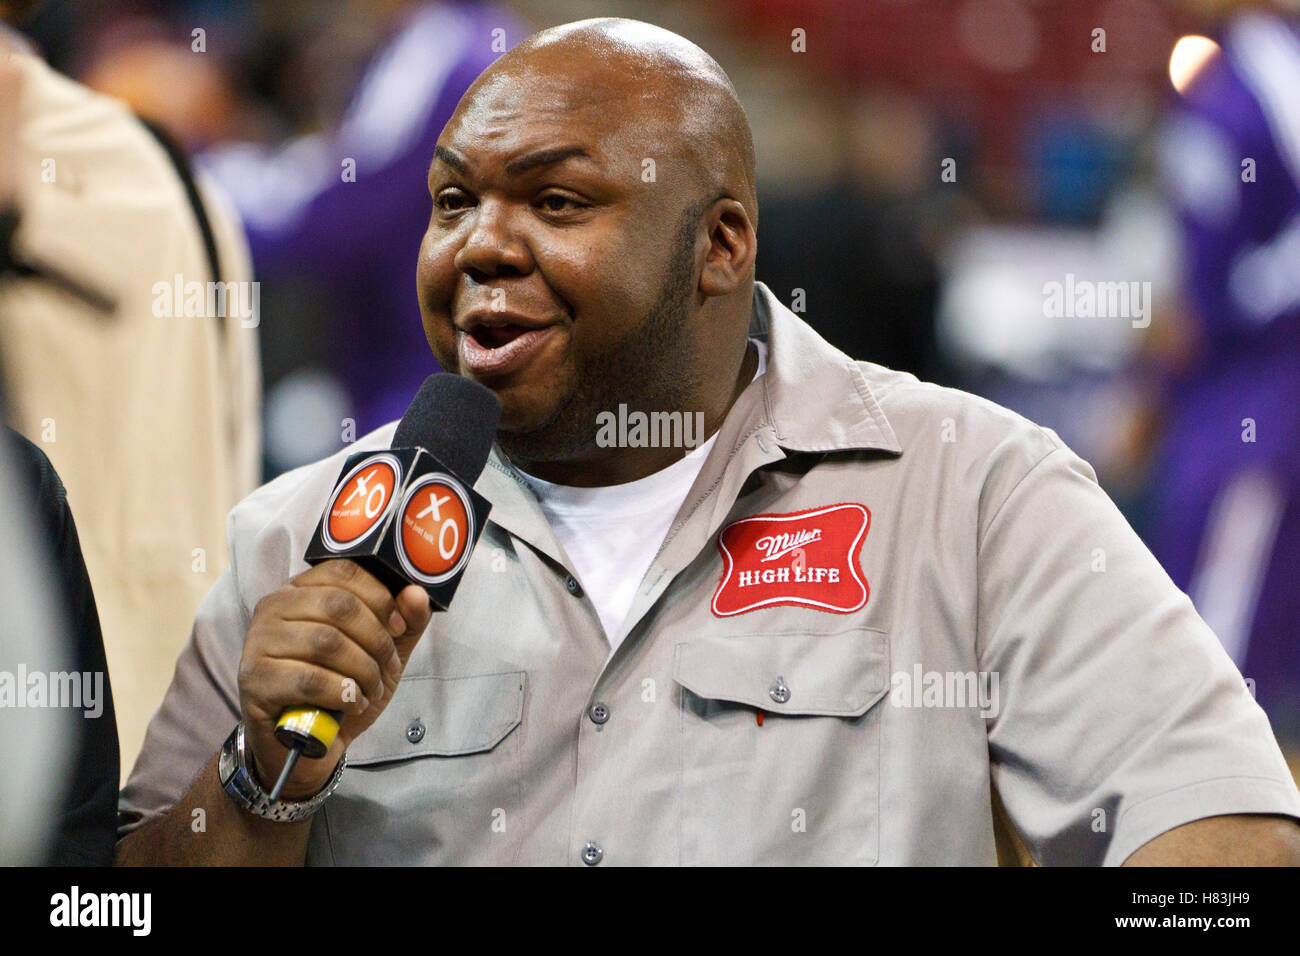 January 19, 2011; Sacramento, CA, USA;  Television commerical actor Windell Middlebrooks before the game between the Sacramento Kings and the Portland Trail Blazers at the ARCO Arena. Stock Photo